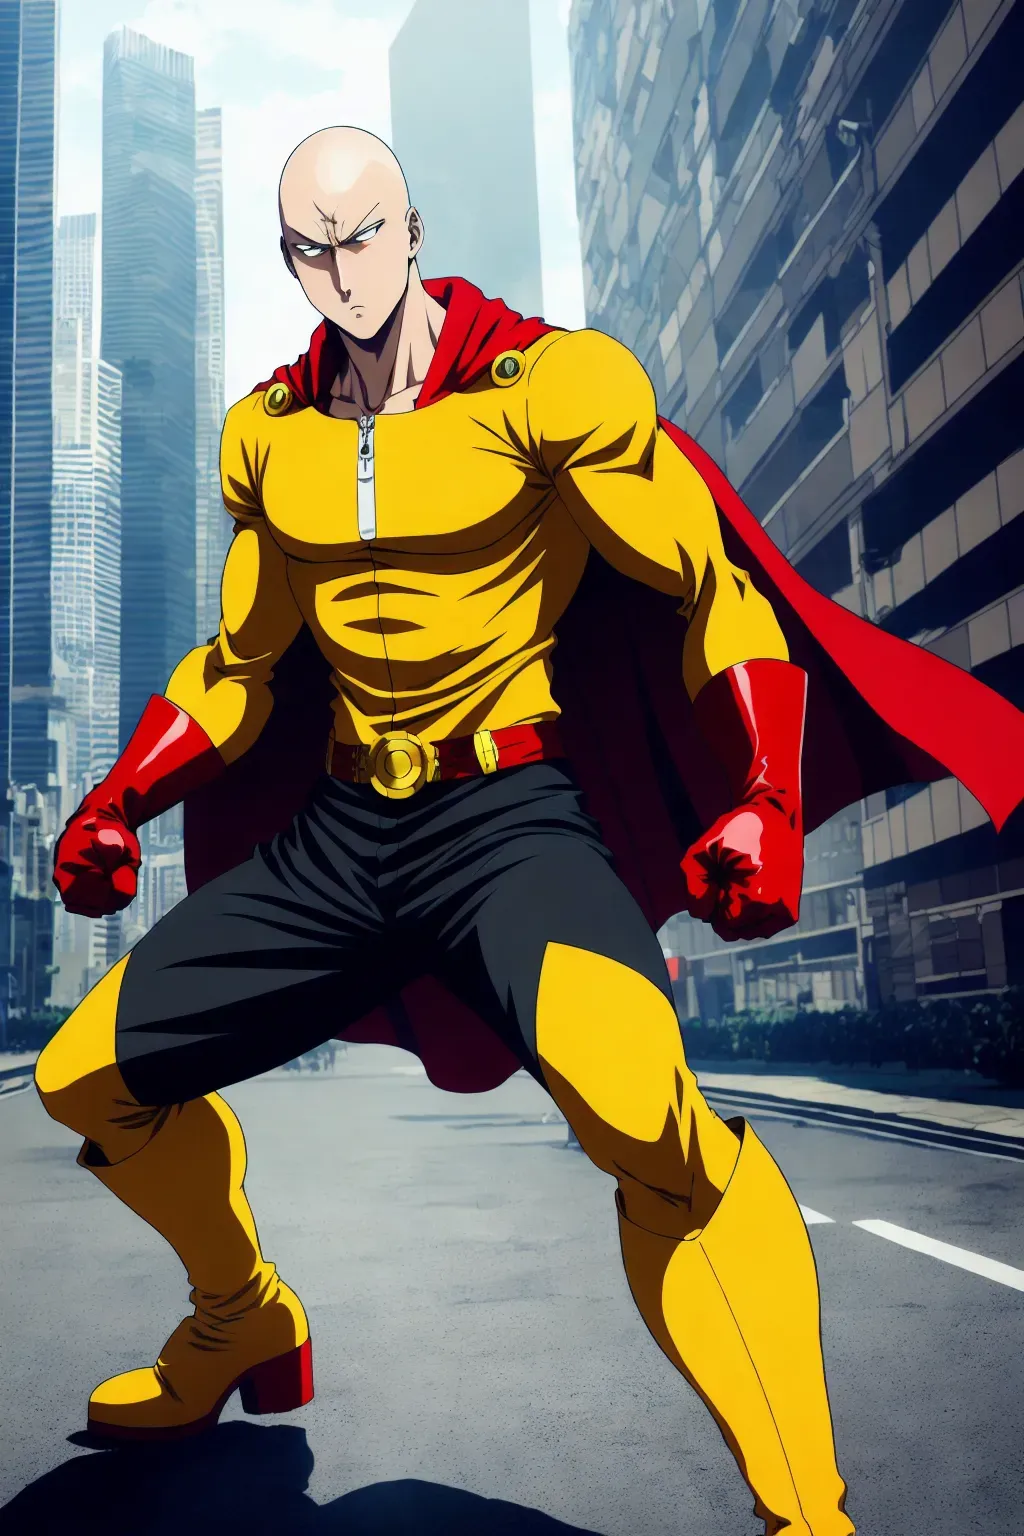 Dopamine Girl - One punch man, anime, bald head, 8k wallpaper, black eyes,  best quality, ultra hd, global lighting, hi-resolution, high quality,  yellow costume, white cape, red gloves, red boots, punching towards